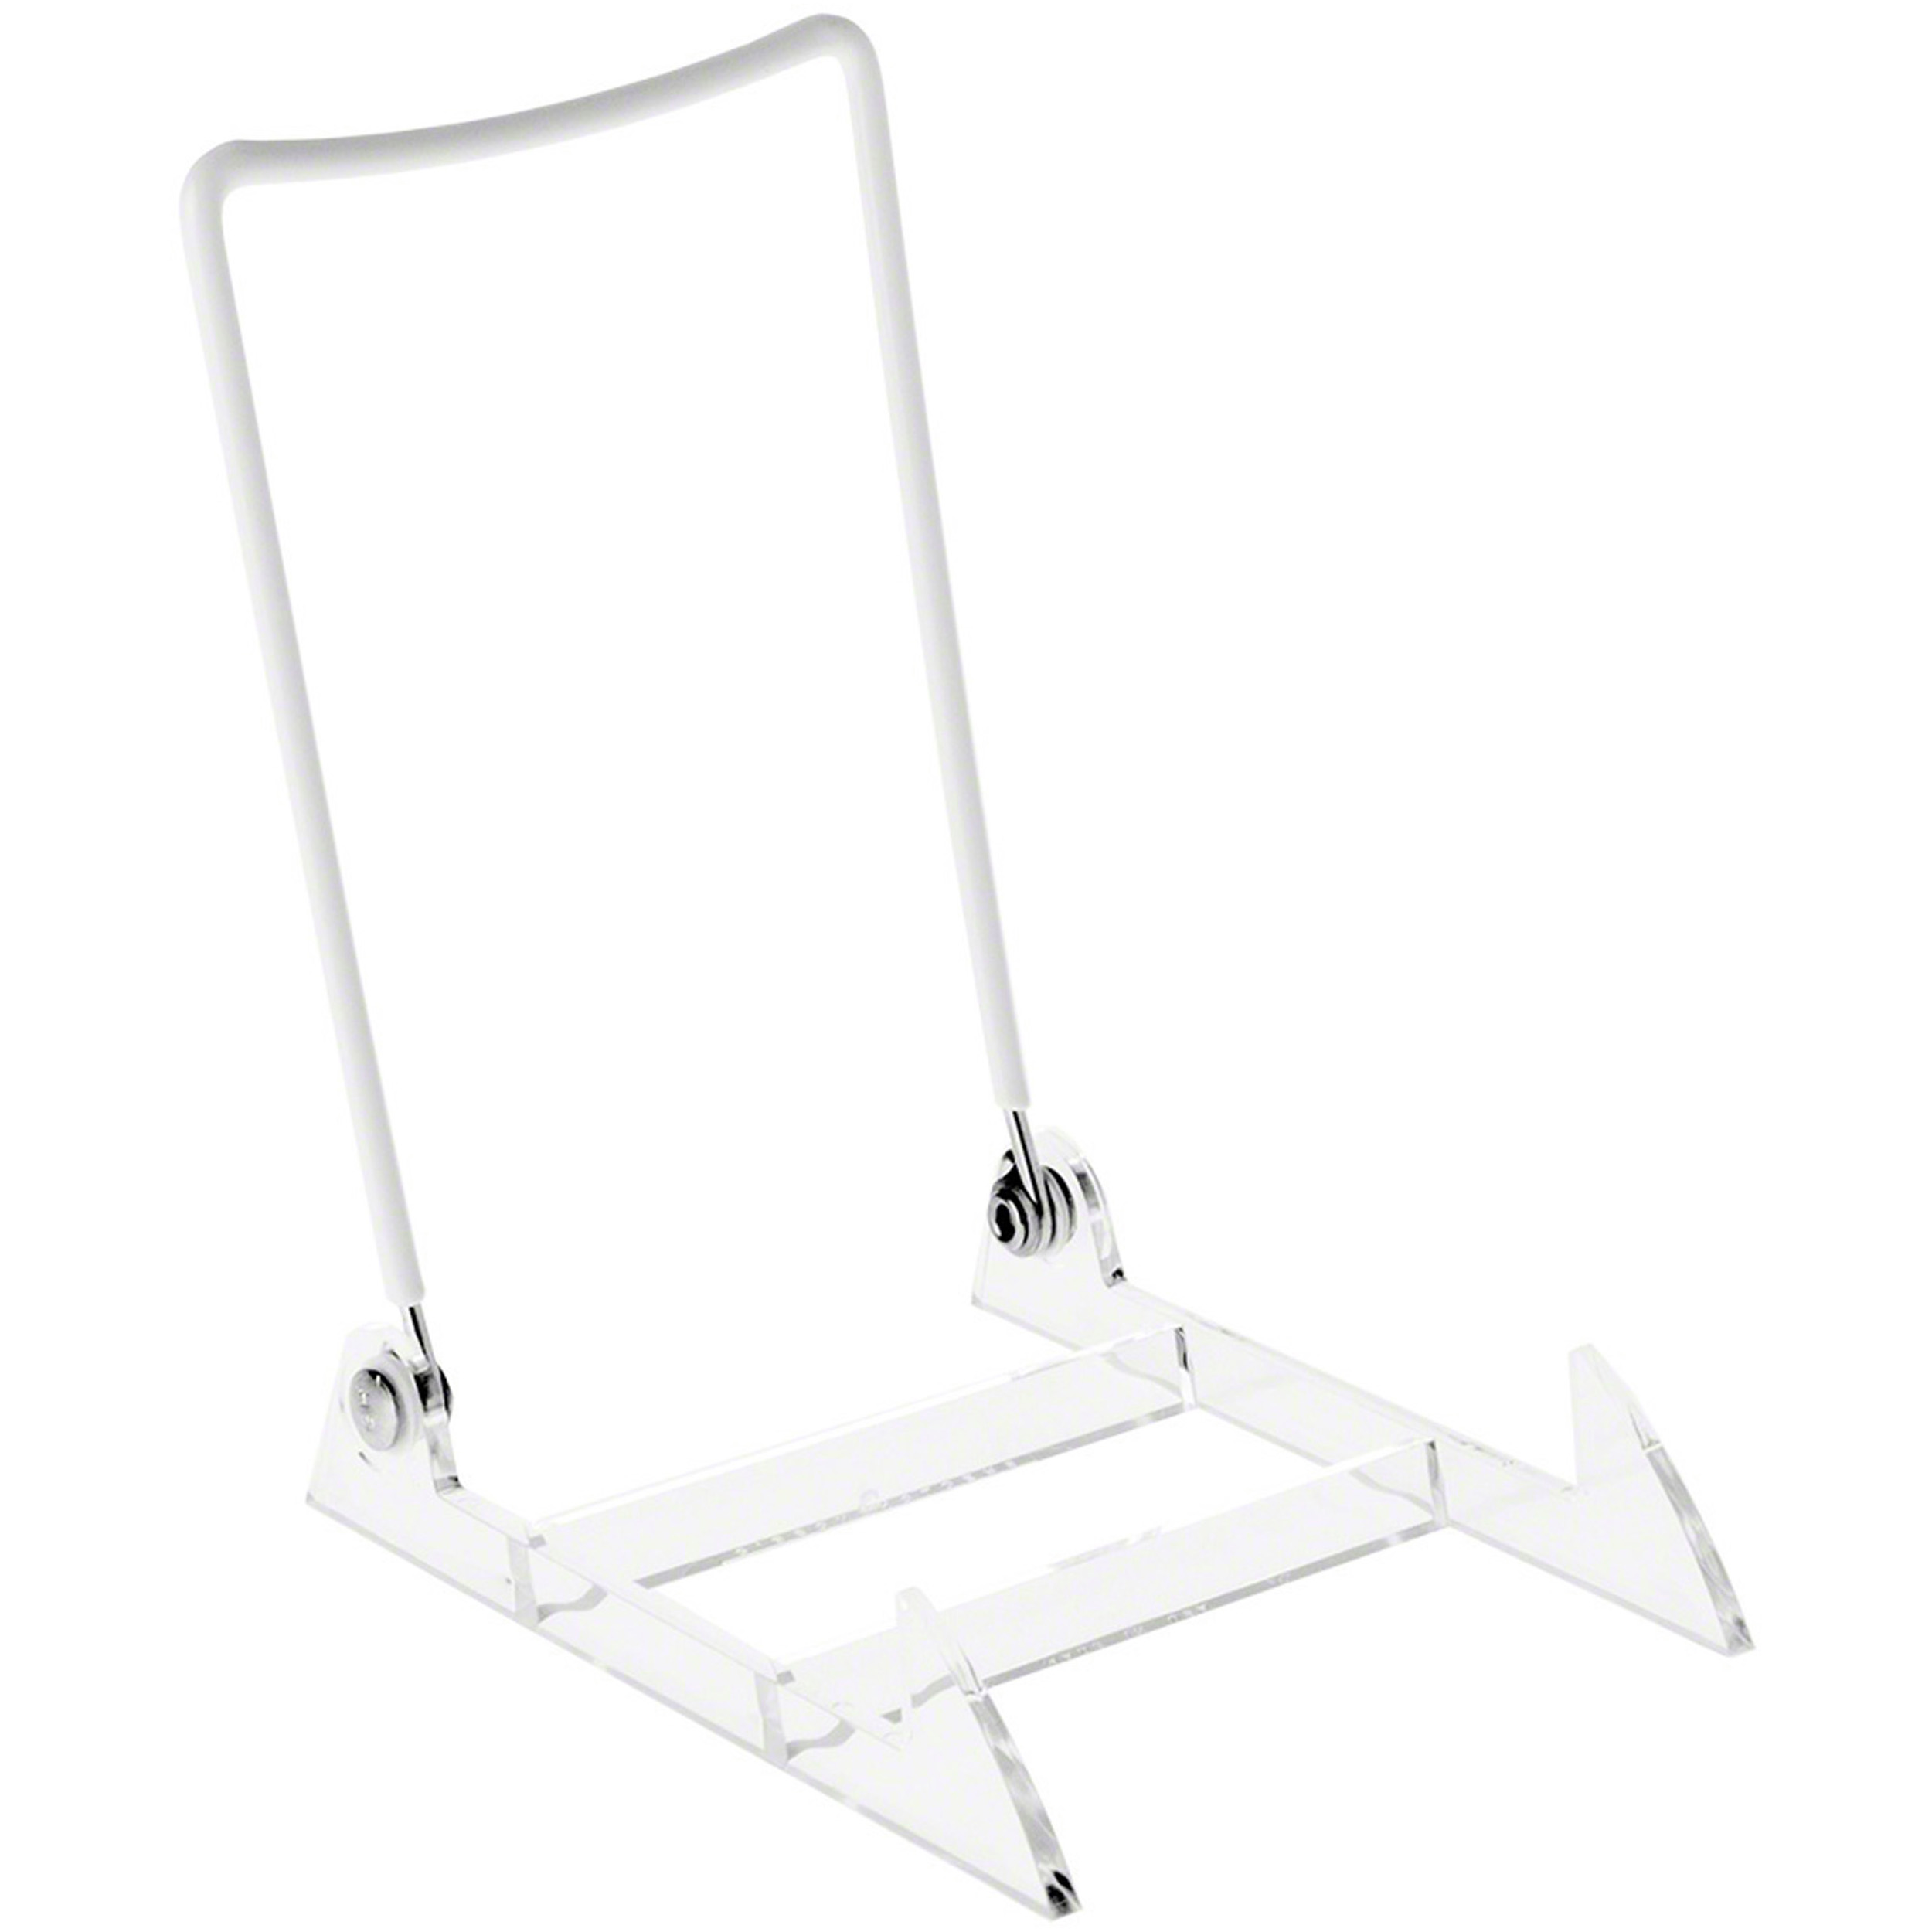 Gibson Holders 4PL Adjustable White Wire and Clear Acrylic Display Easel, 4" W x 5.5" D x 6" H, Pack of 2 - image 1 of 1